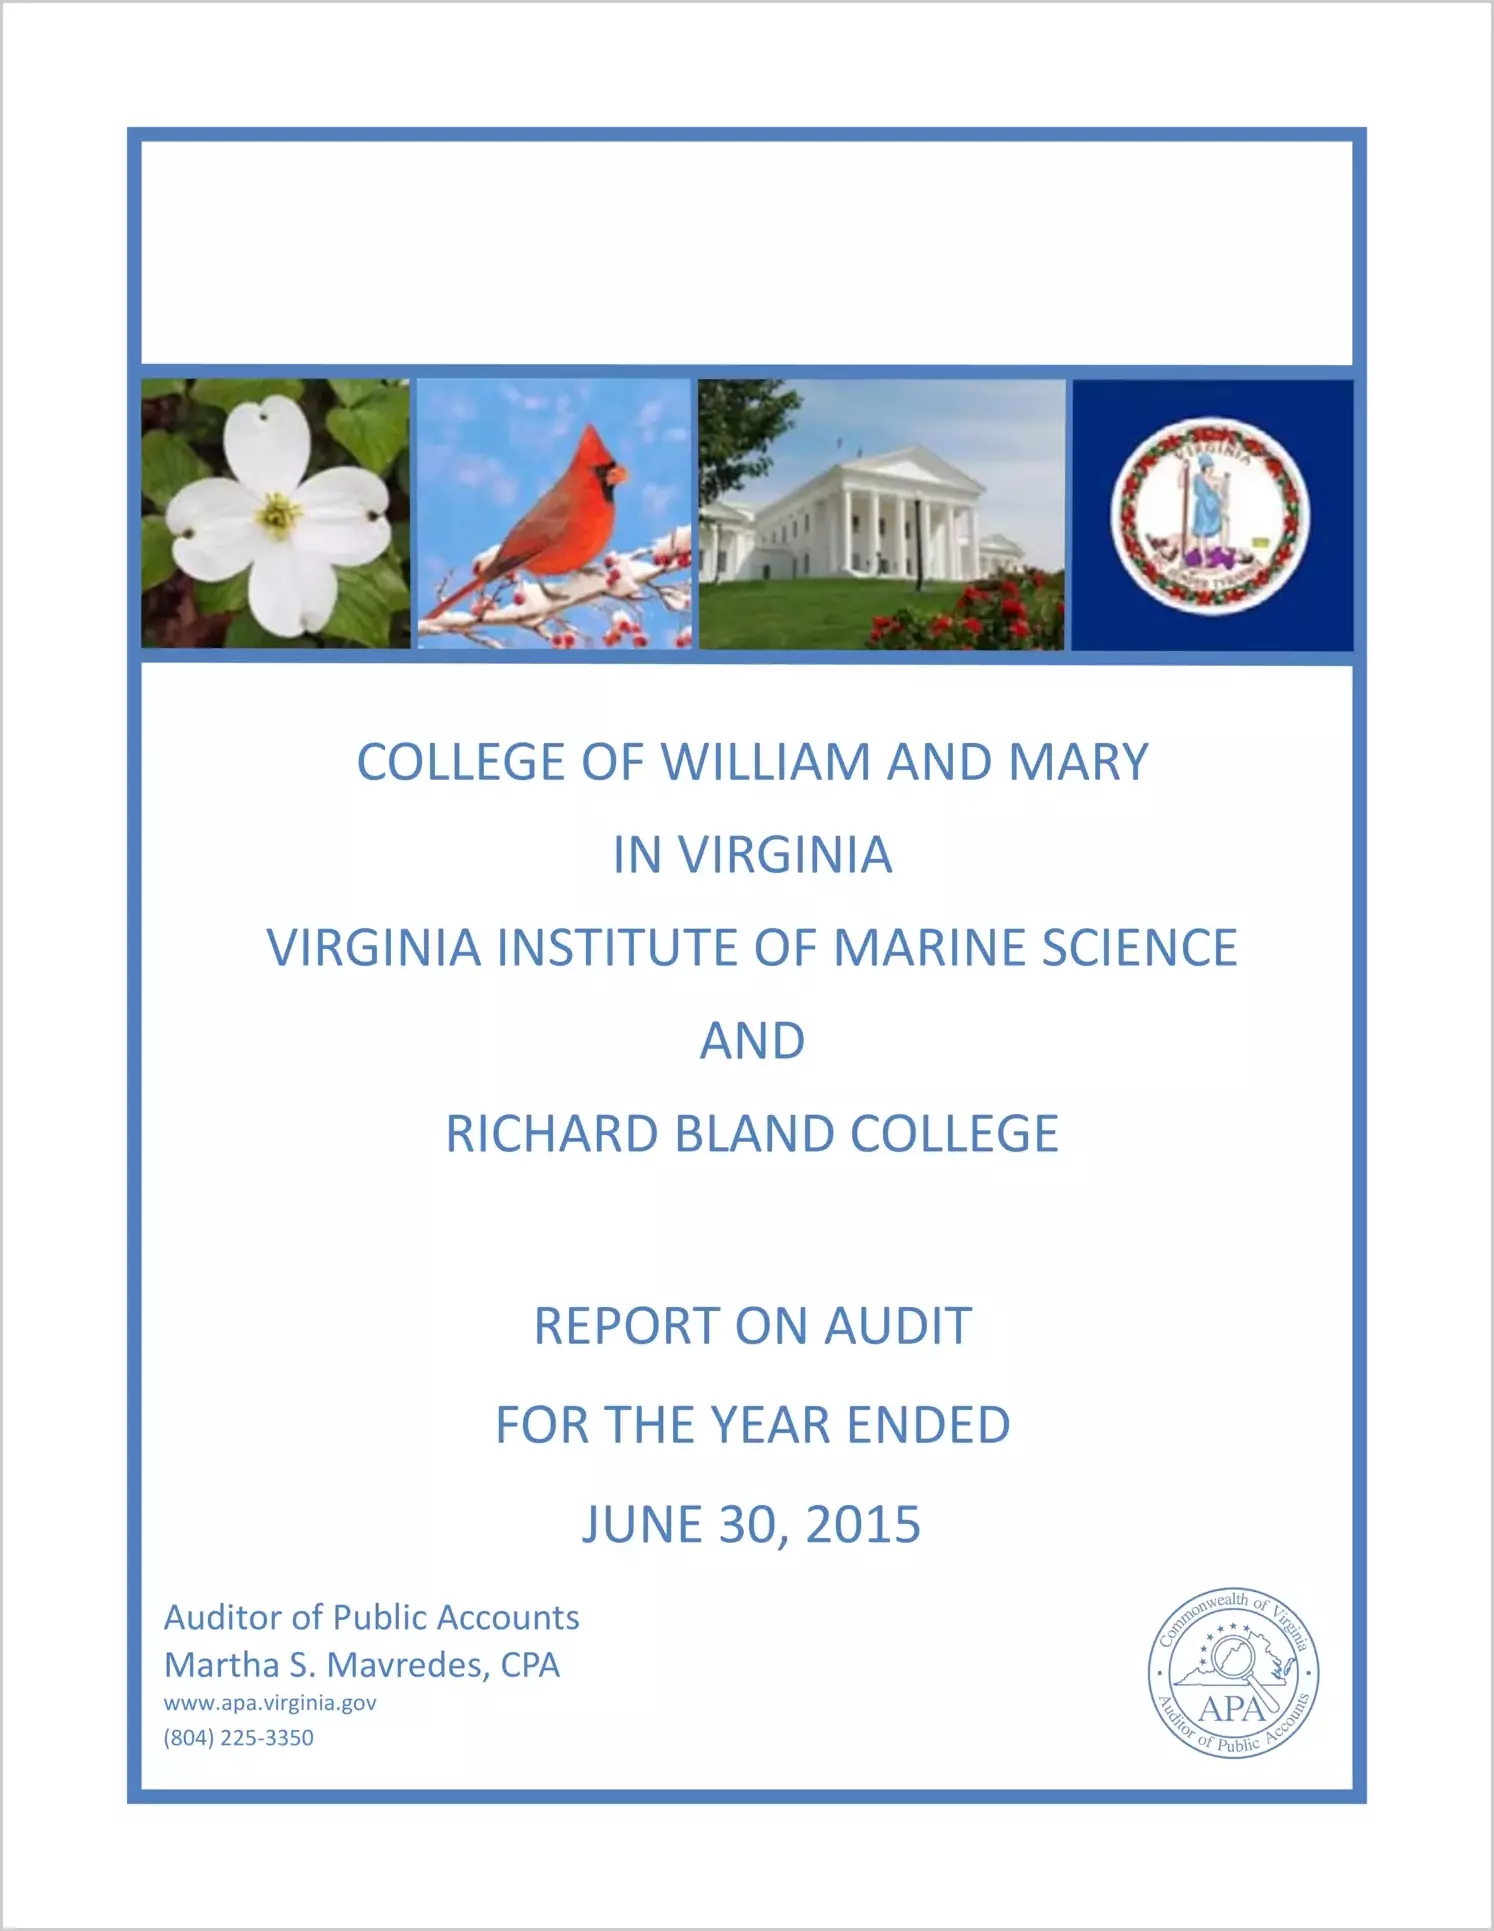 The College of William and Mary in Virginia, Virginia Institute of Marine Science, and Richard Bland College for the year ended June 30, 2015